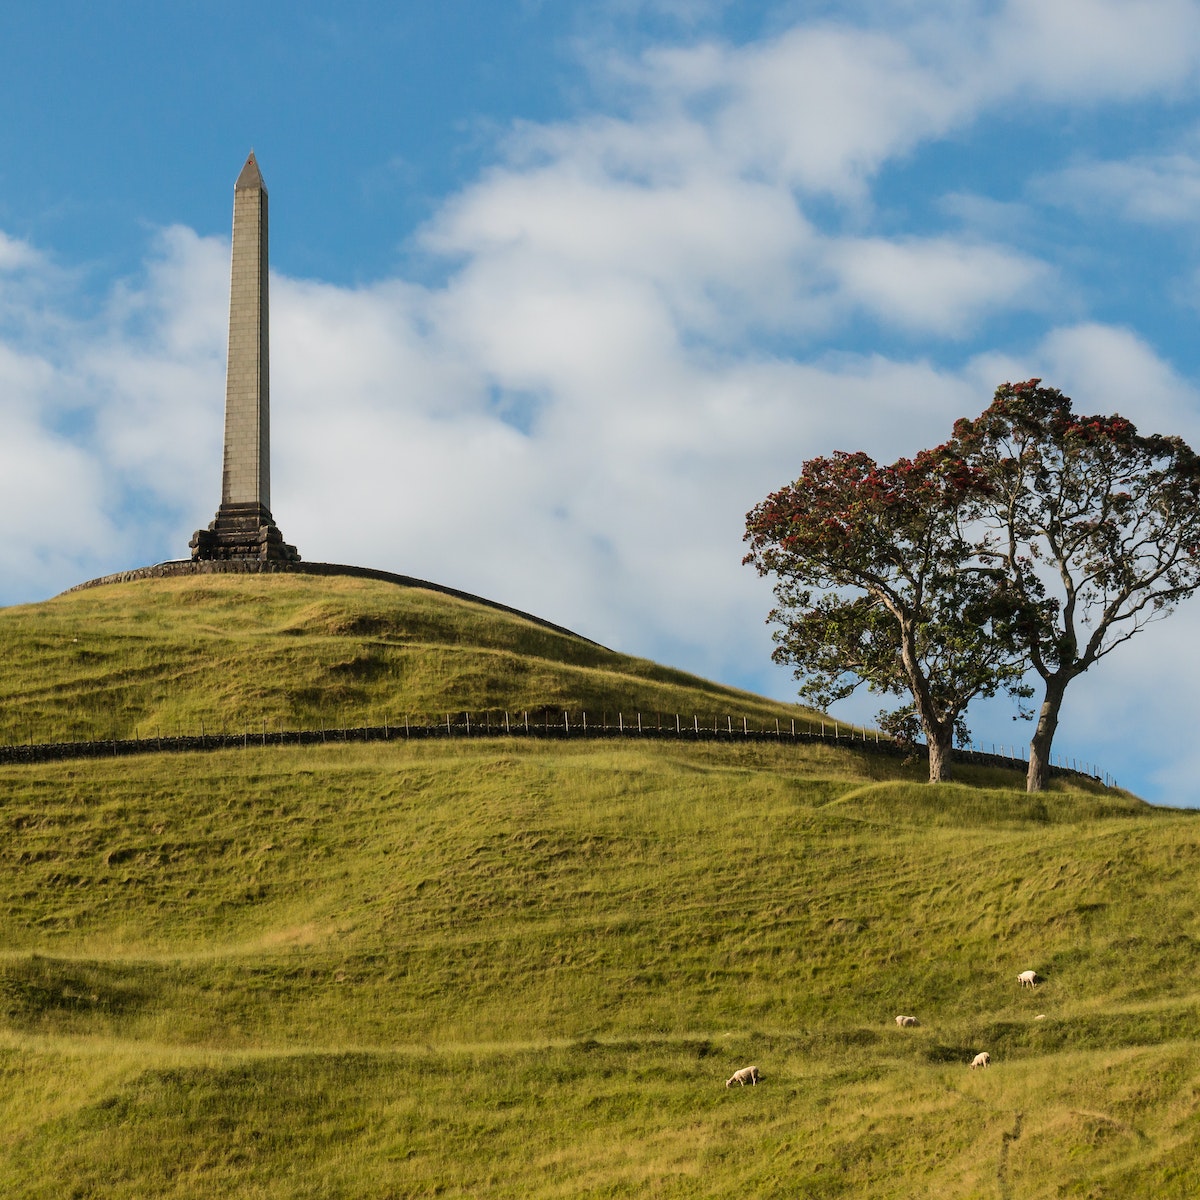 One Tree Hill monument in Auckland, New Zealand.